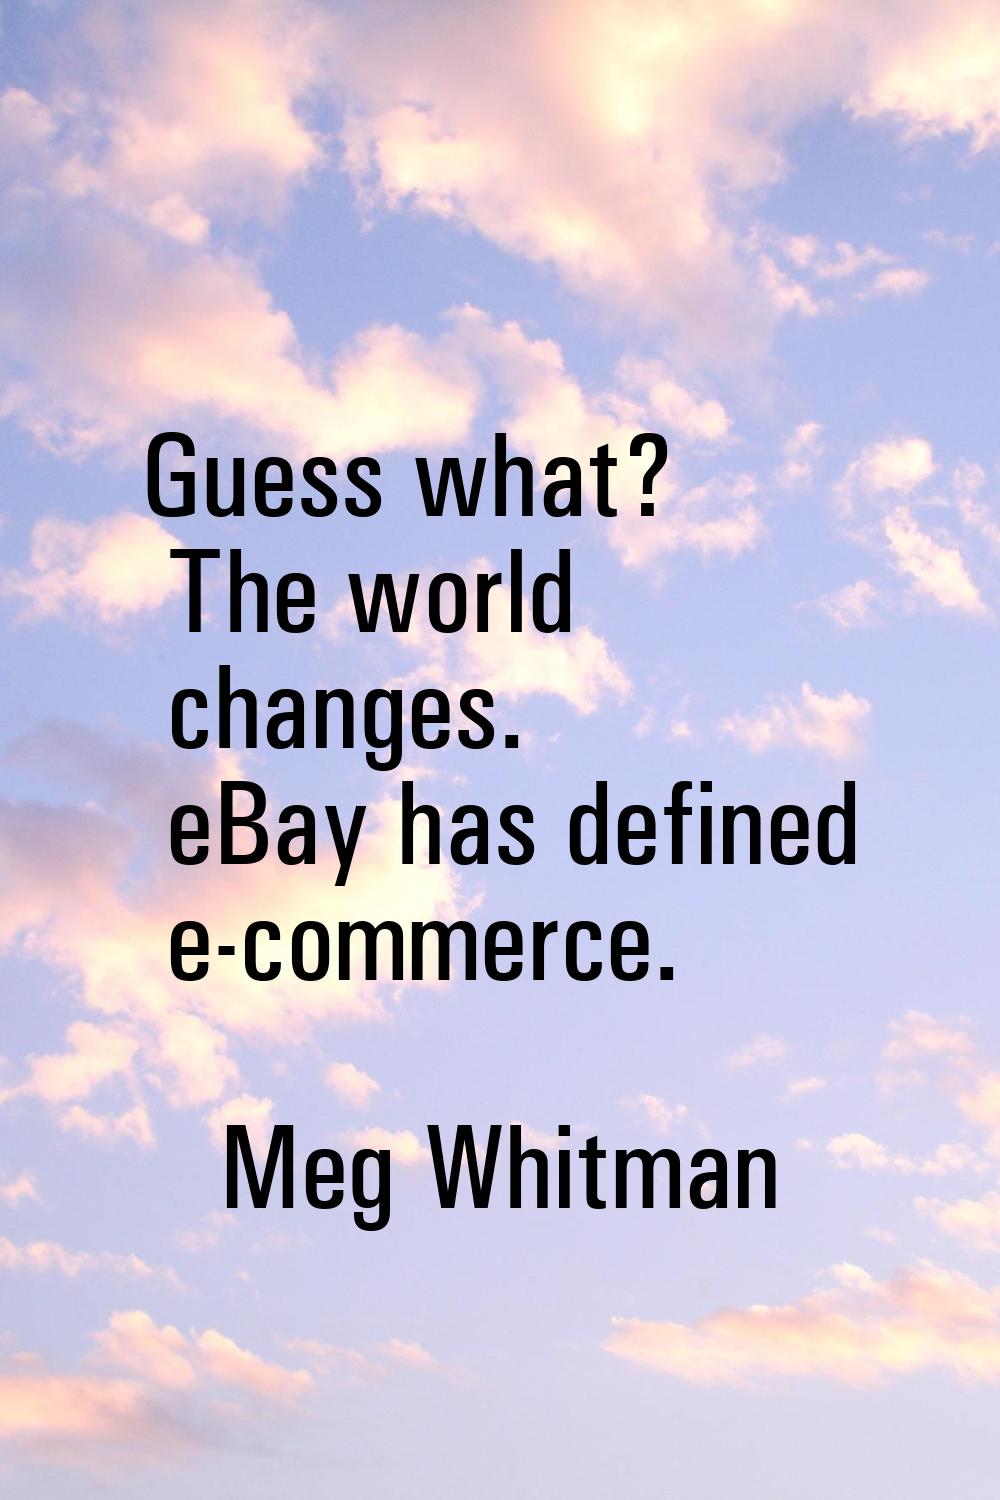 Guess what? The world changes. eBay has defined e-commerce.